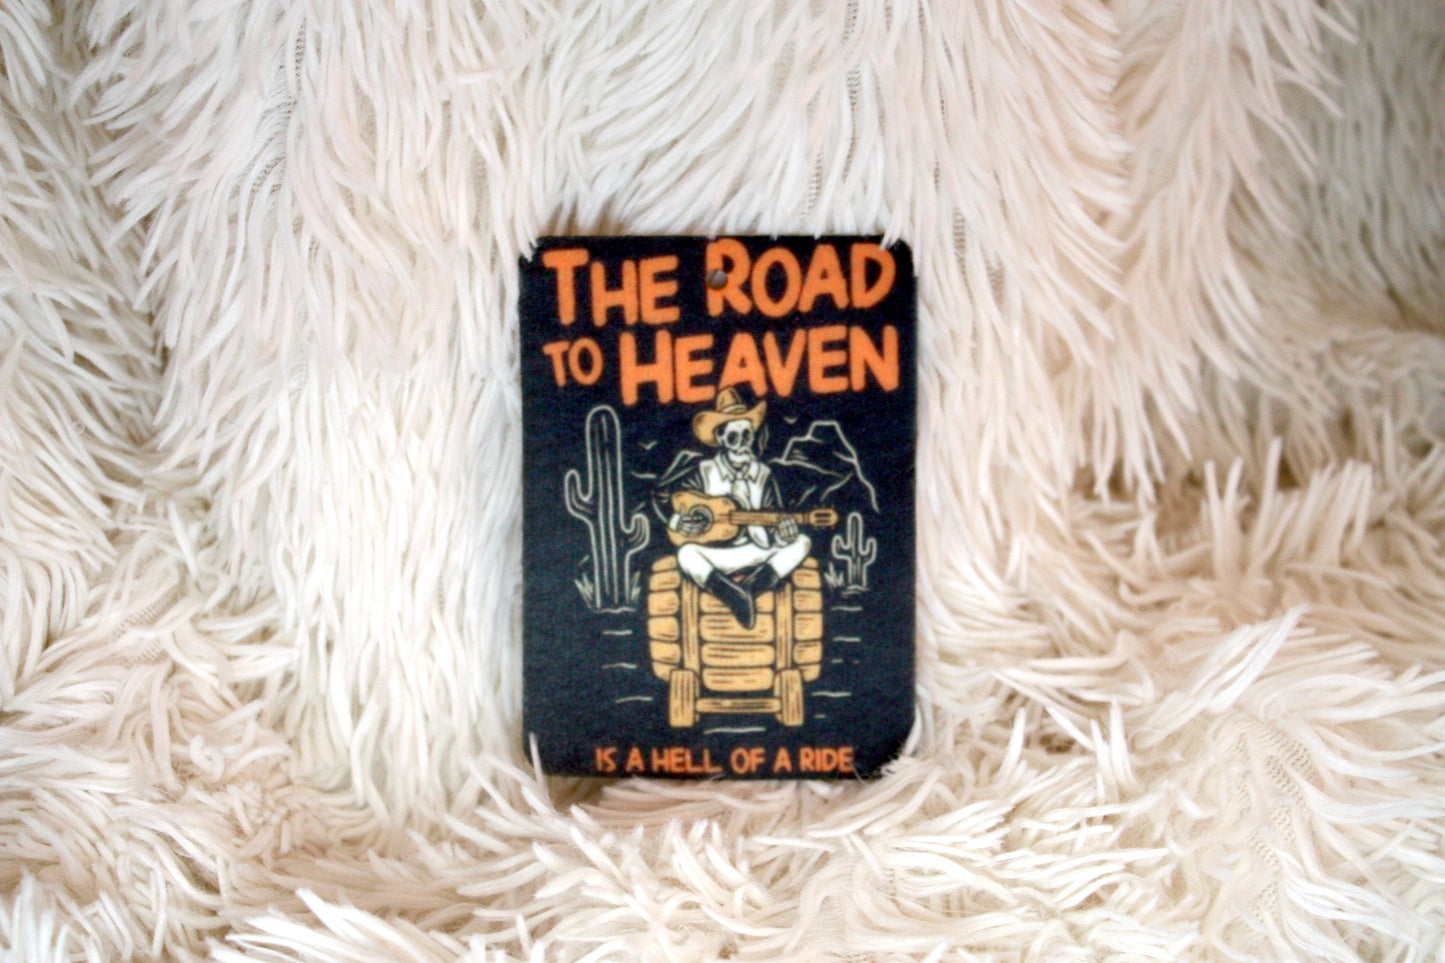 "The Road To Heaven, Is A Hell Of A Ride"